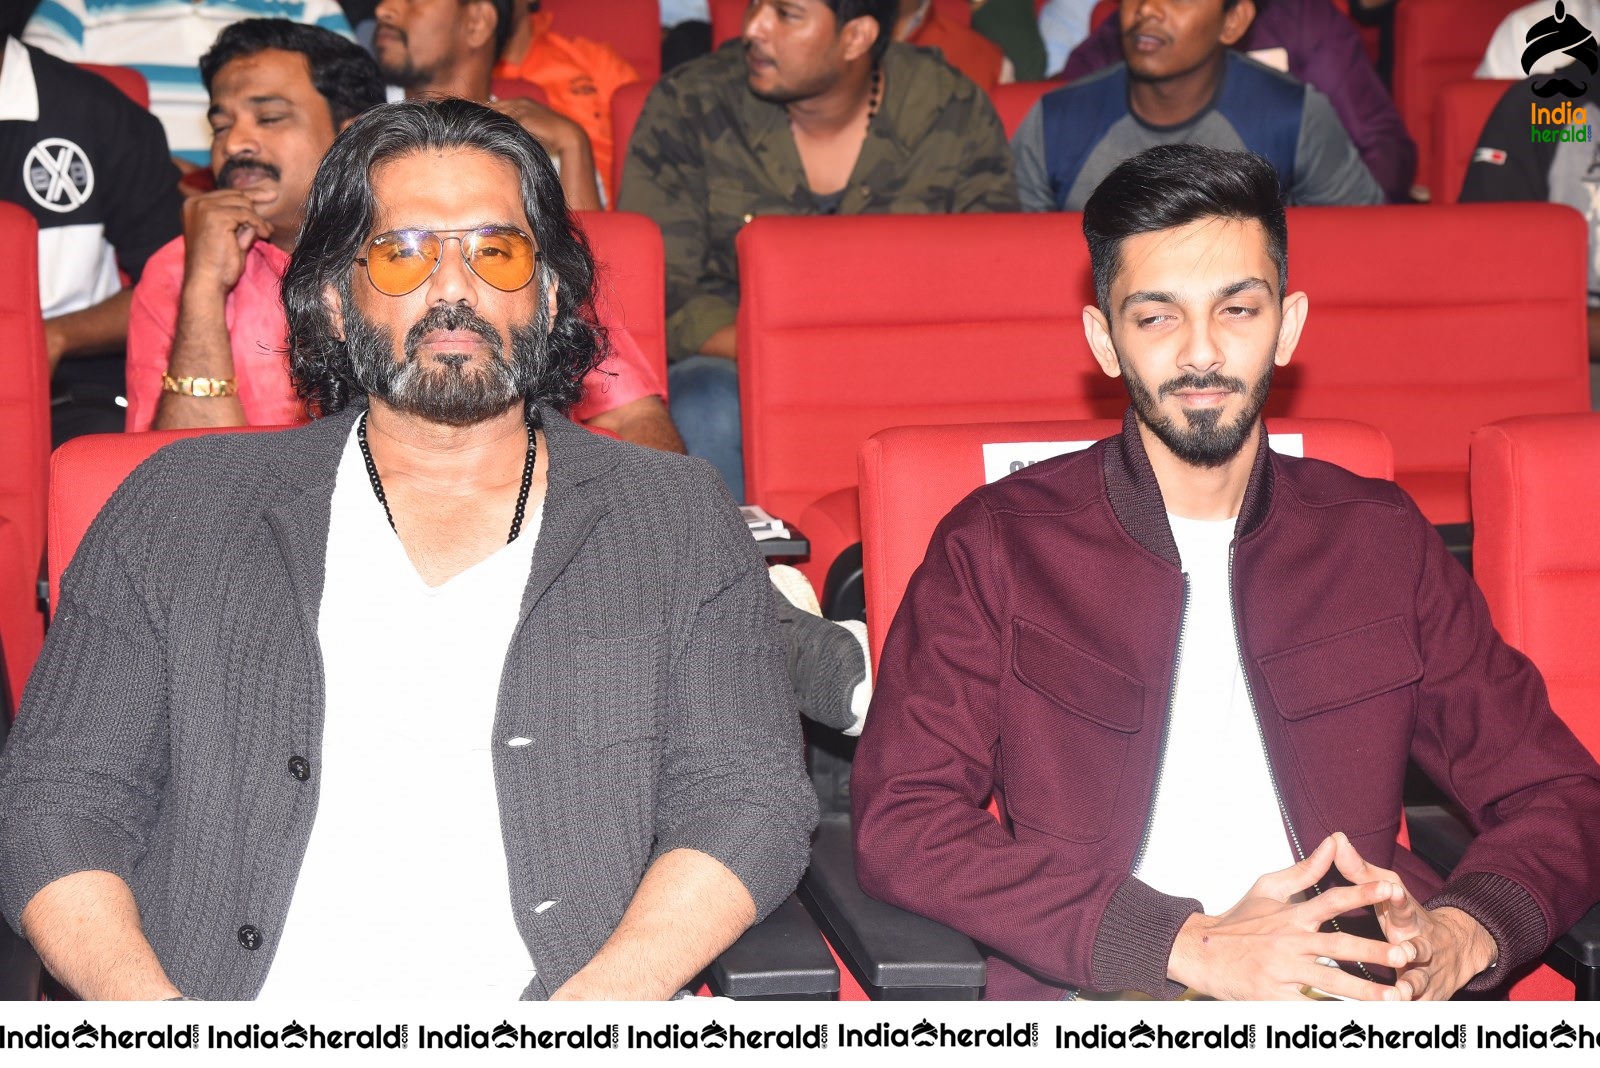 Actor Sunil Shetty and Music Composer Anirudh spotted together